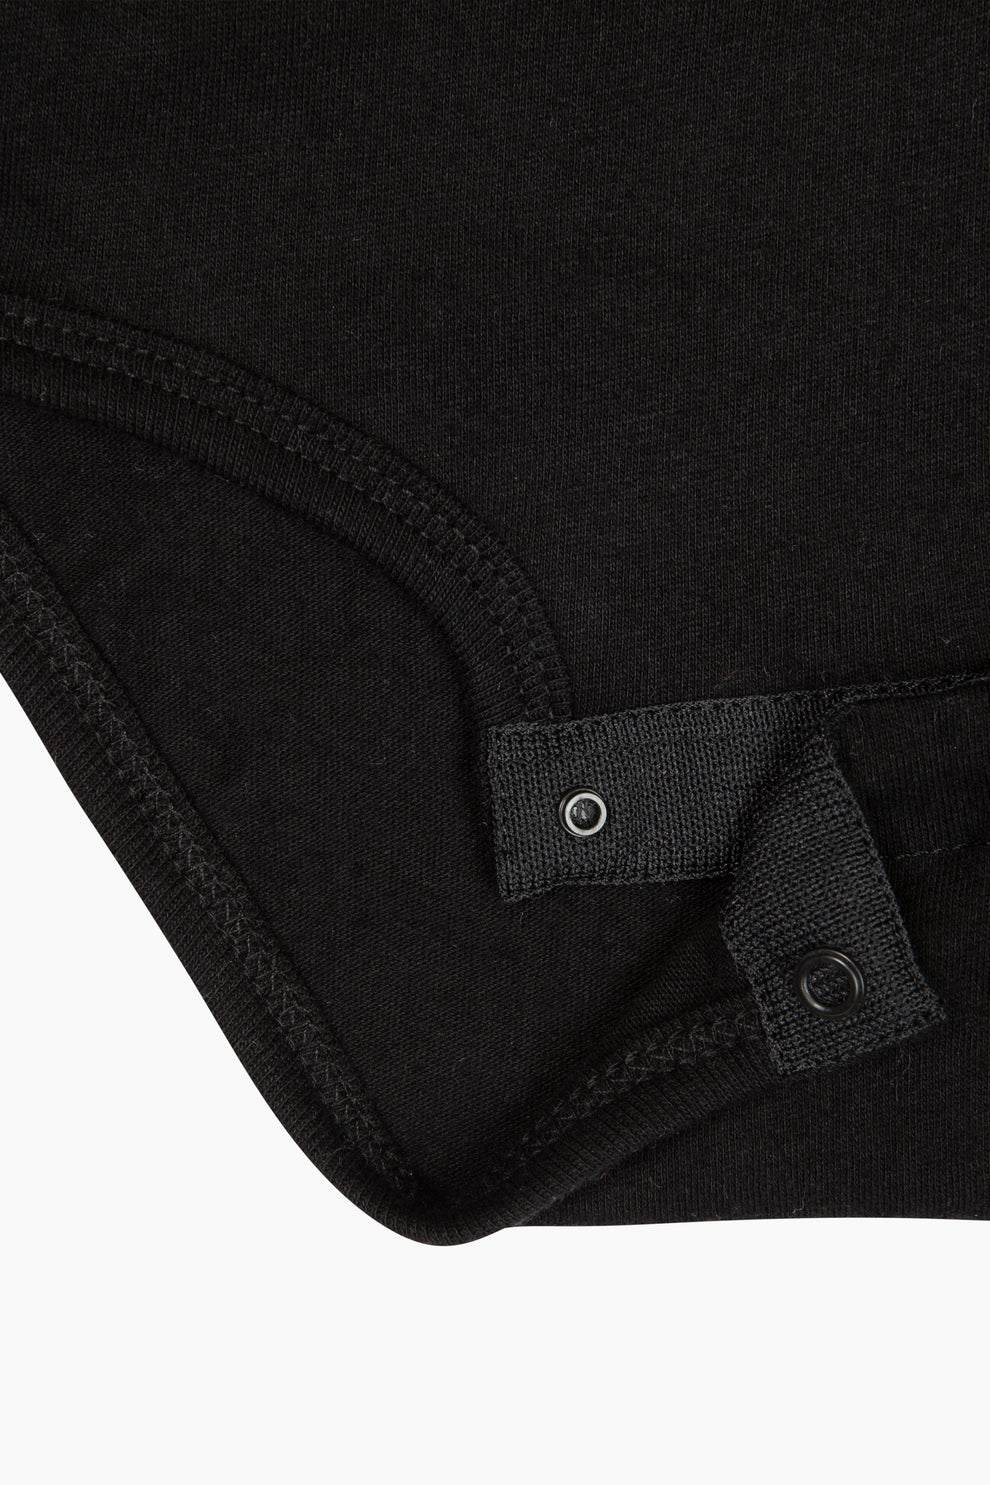 Closeup image of the black onesie that shows the buttons 